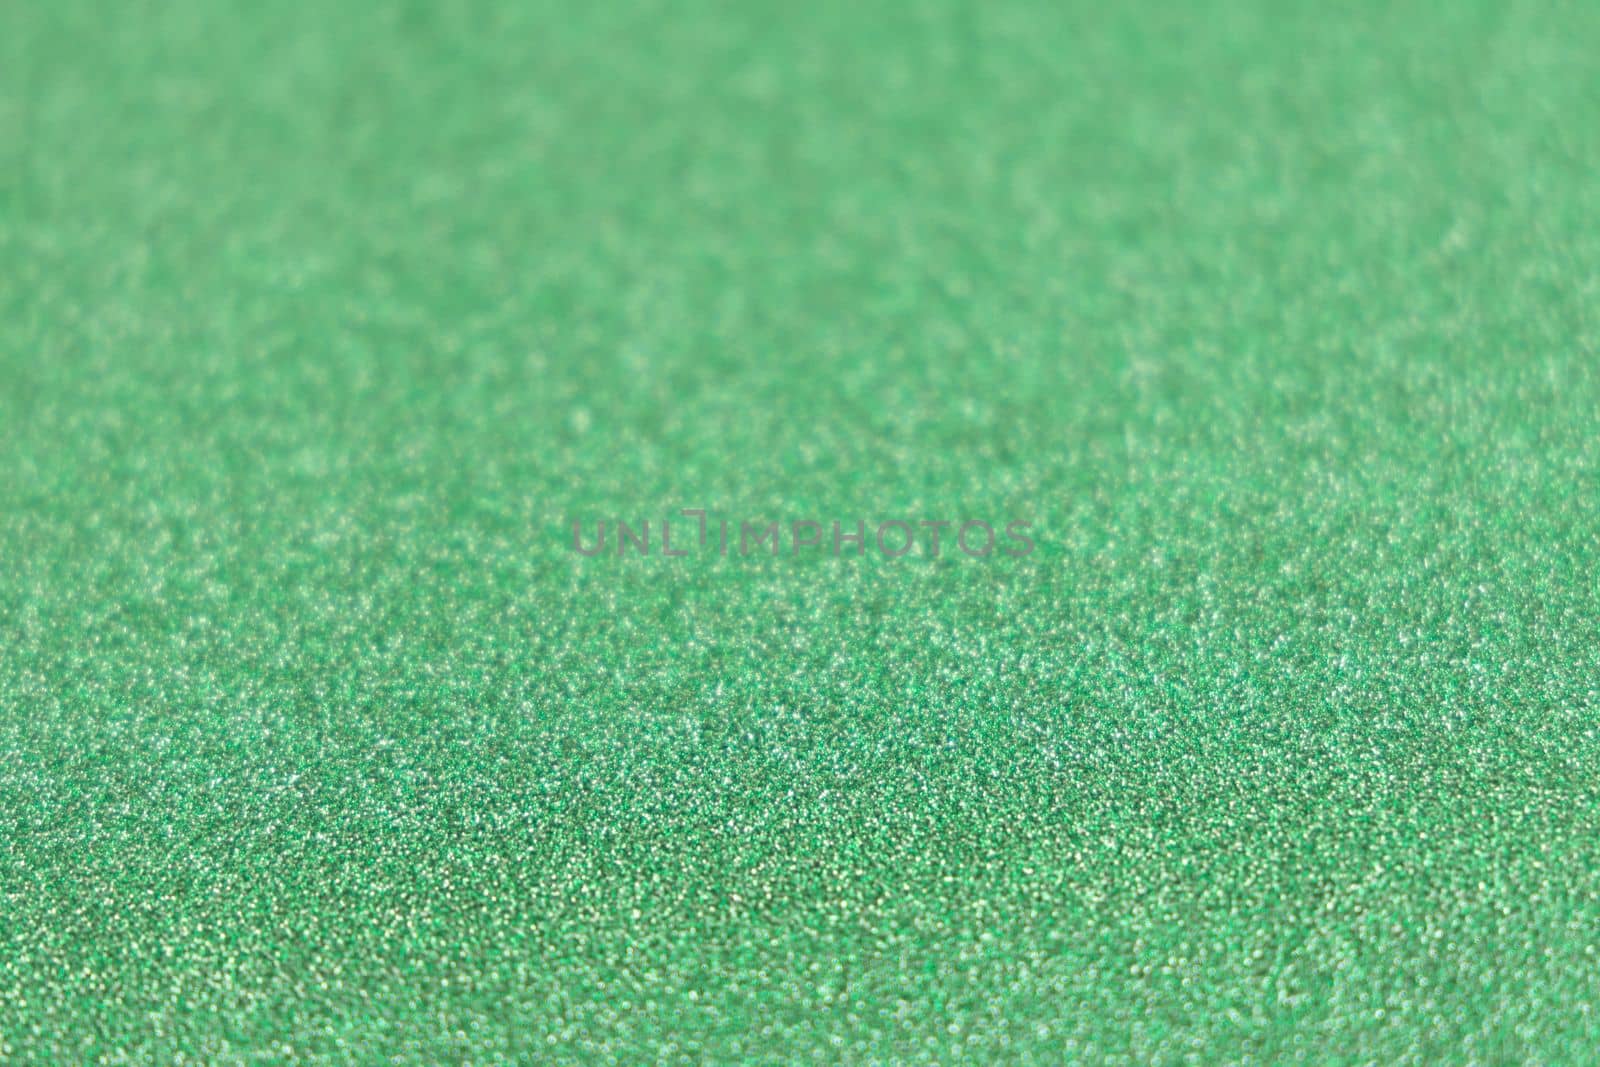 Green shiny glitter paper texture. Shining luxurious fabric. Glimmering golden christmas background paper texture. Shining luxurious fabric. Glimmering light green color st Patric, christmas background.